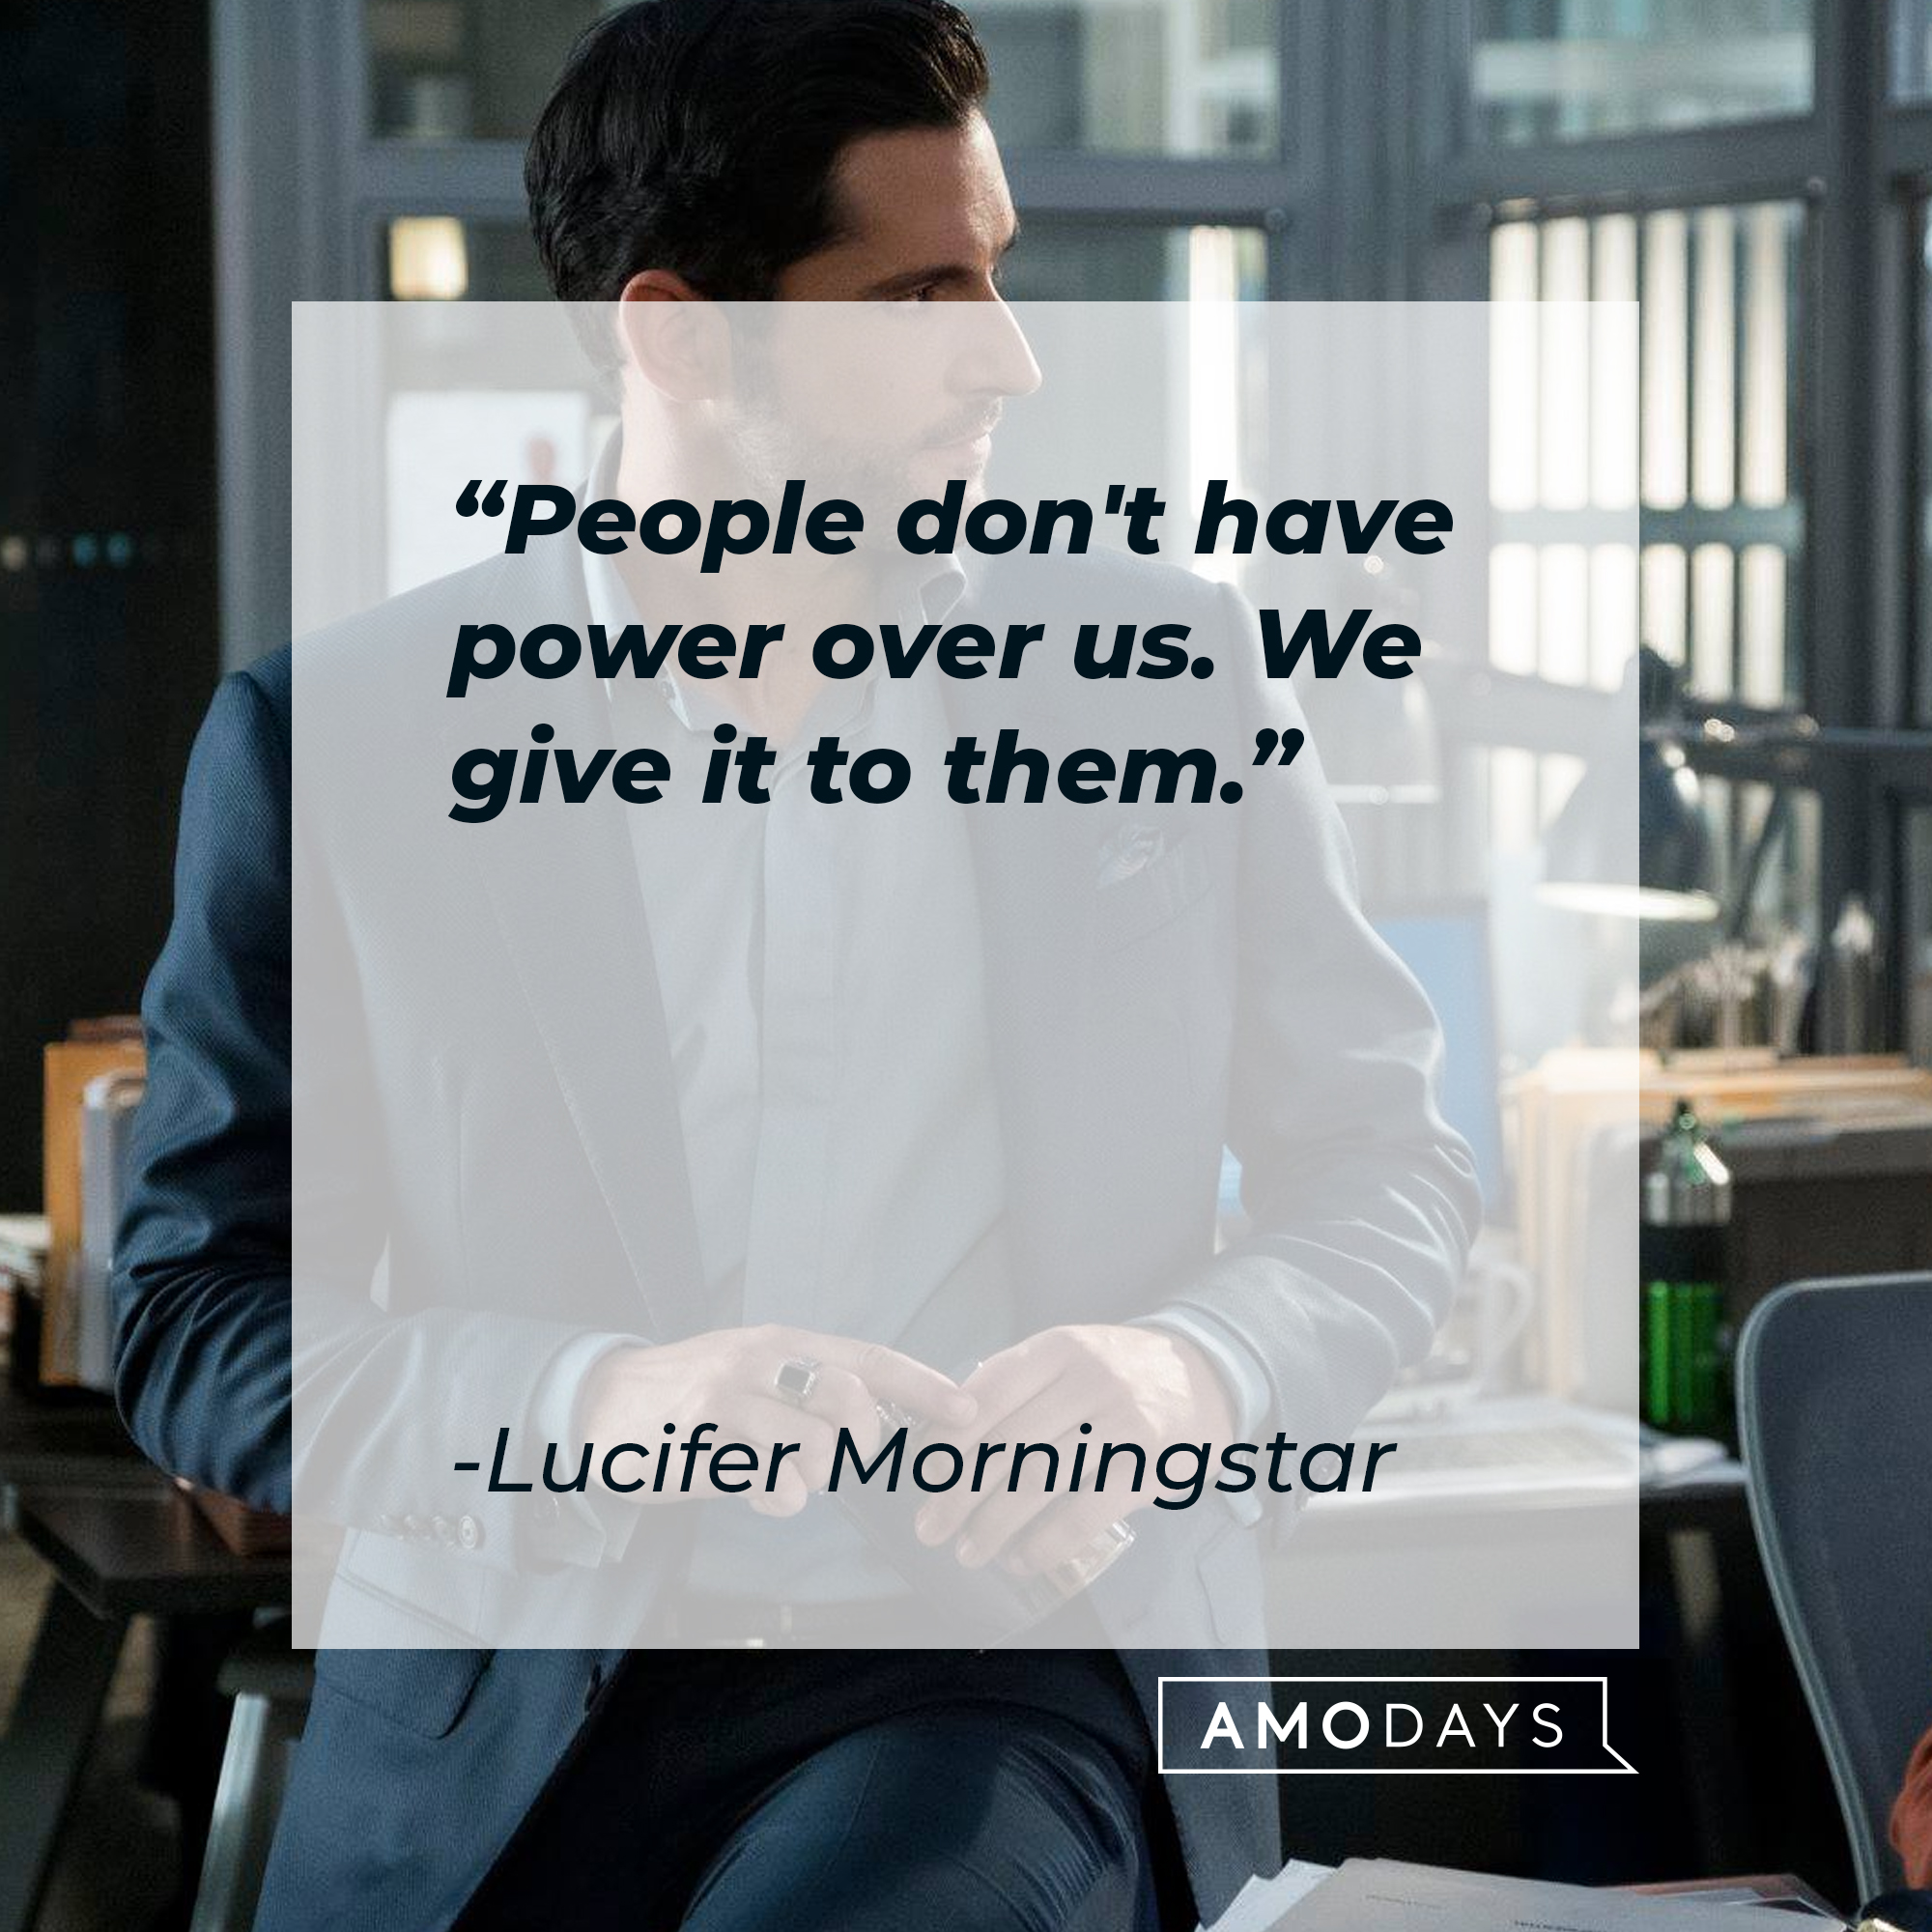 Lucifer Morningstar’s quote: "People don't have power over us. We give it to them." | Source: Facebook.com/LuciferNetflix